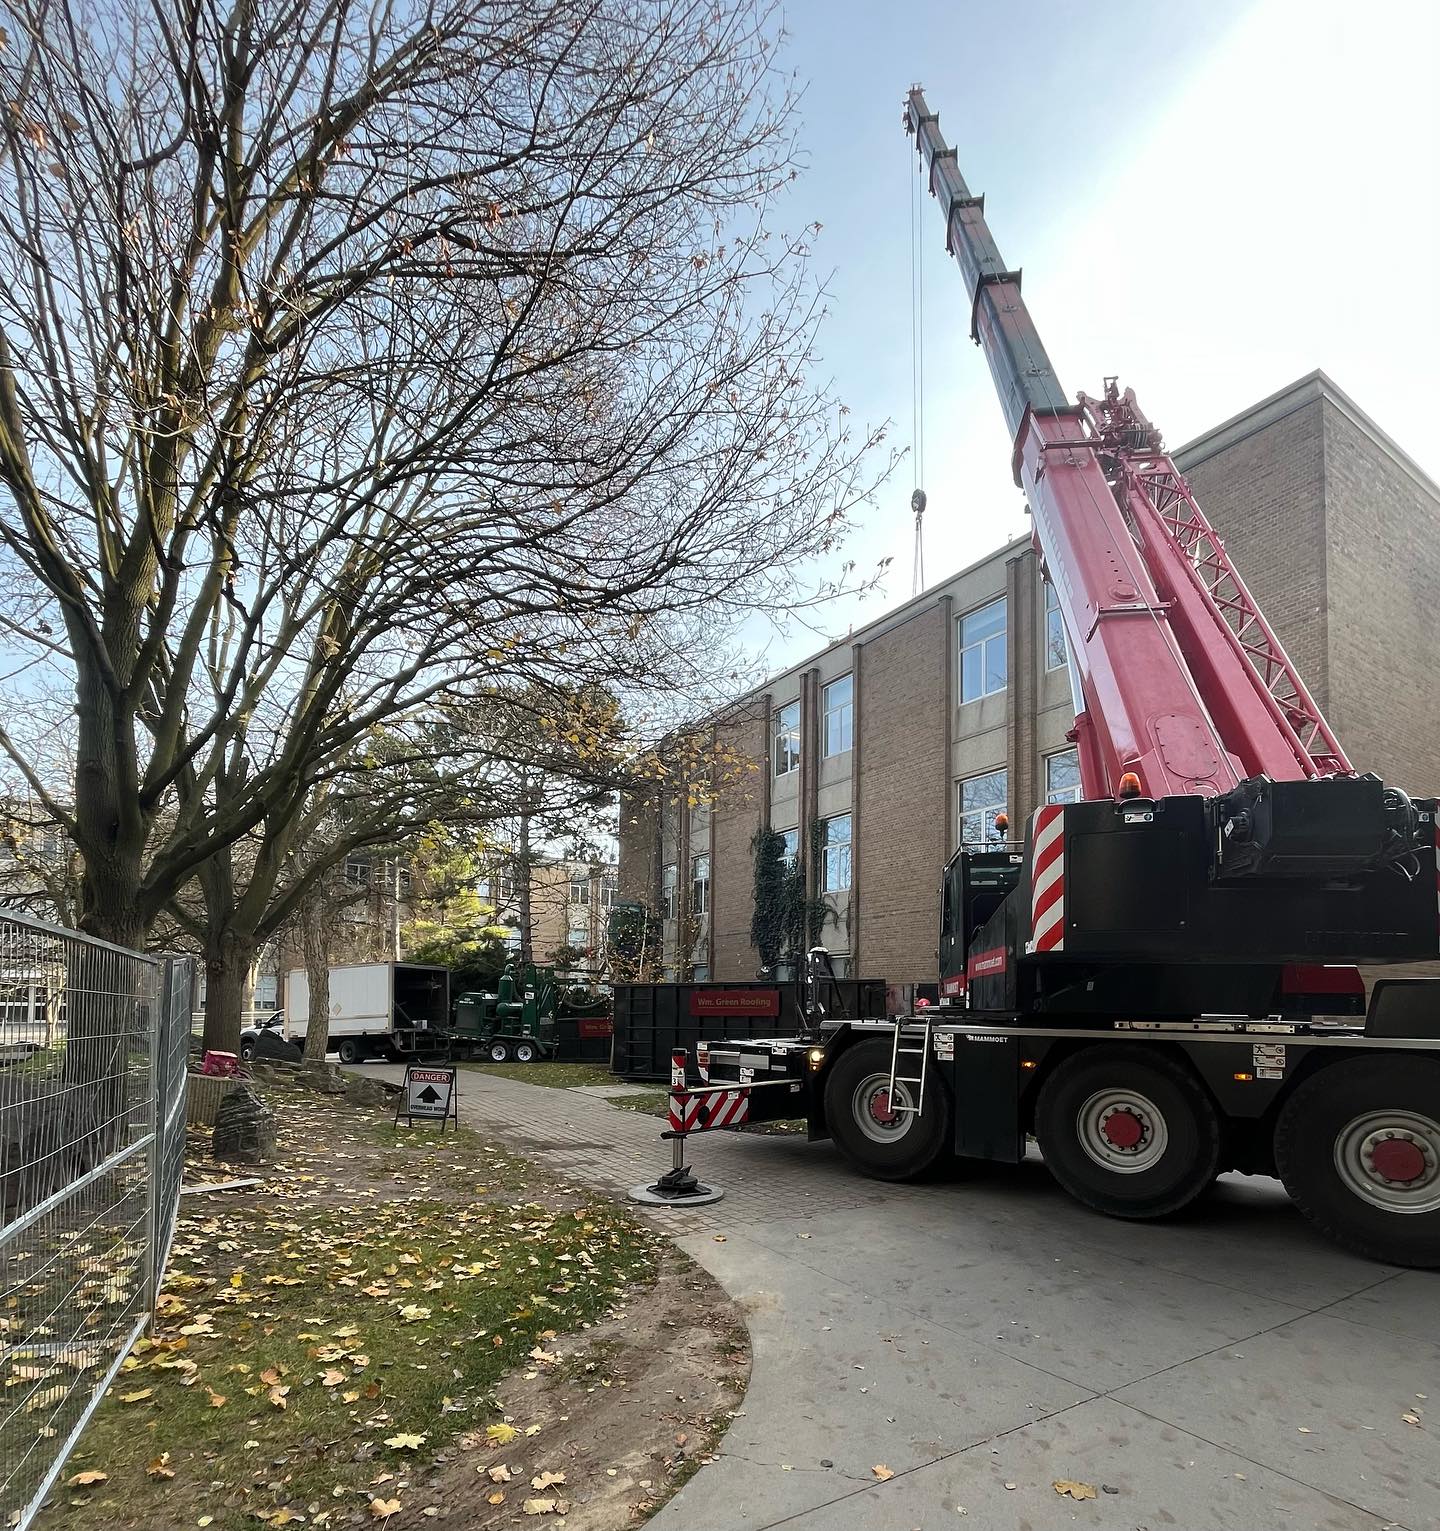 Loading day ☀️🏗️🏢
.
.
.
#flatroofing #roofingcontractor #cranelife #guelphbusiness